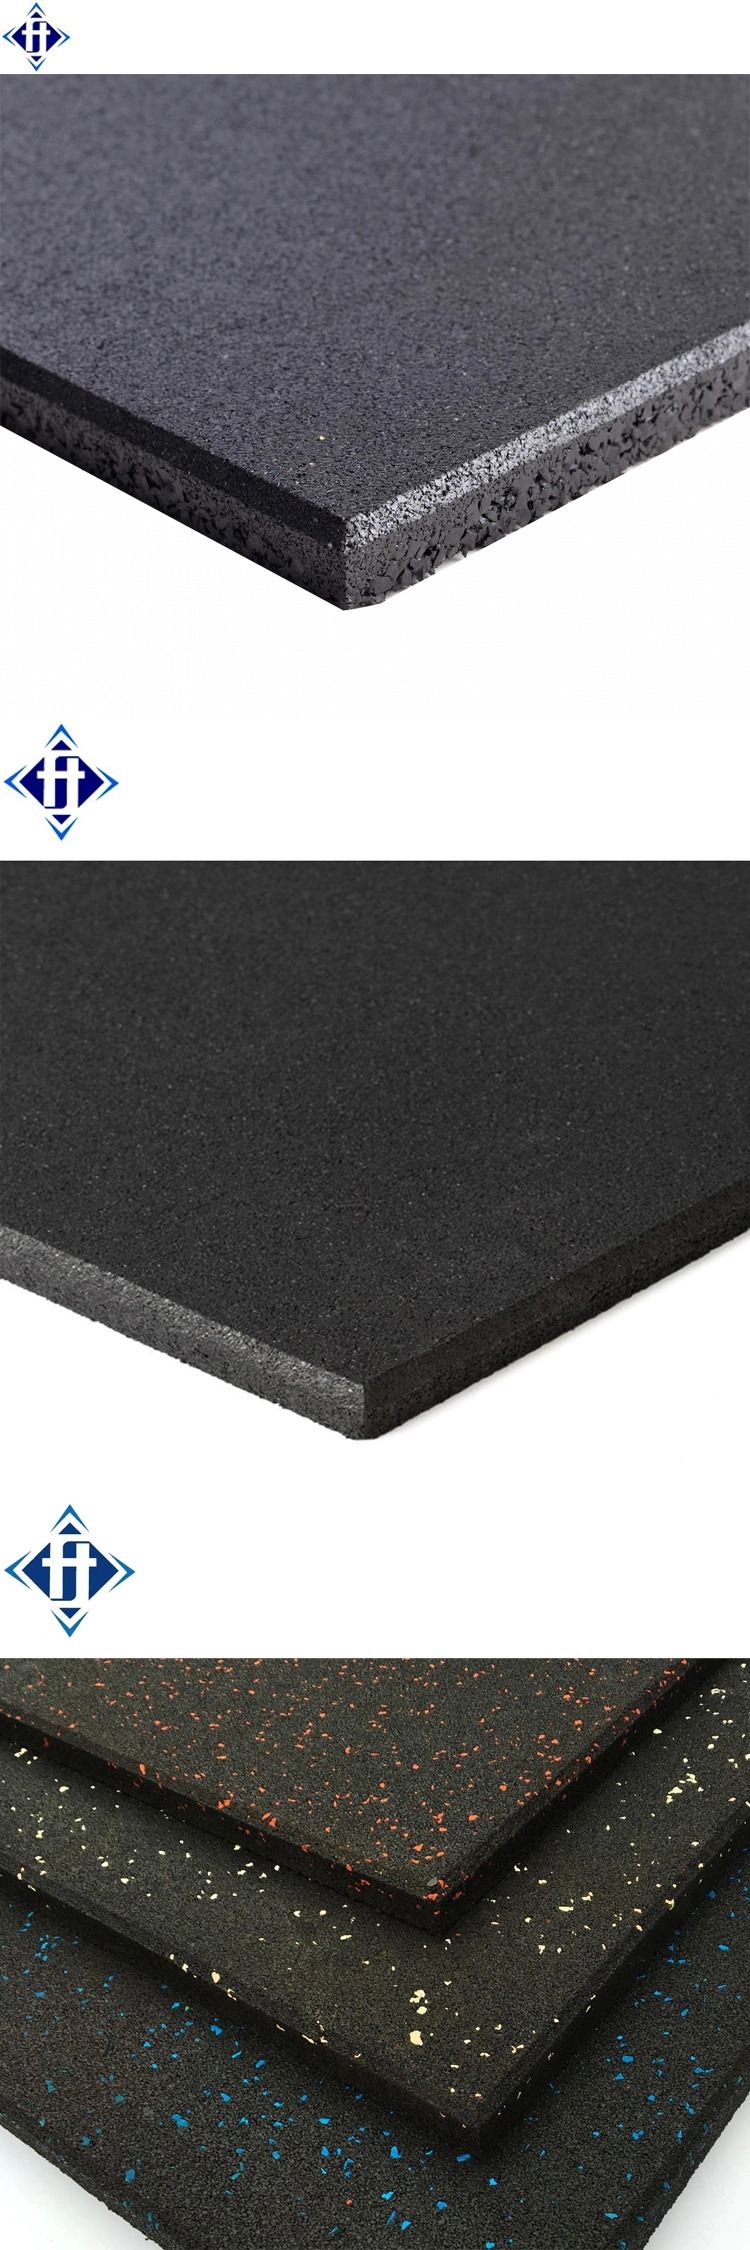 Factory Price Gym Noise Reduction Rubber Flooring